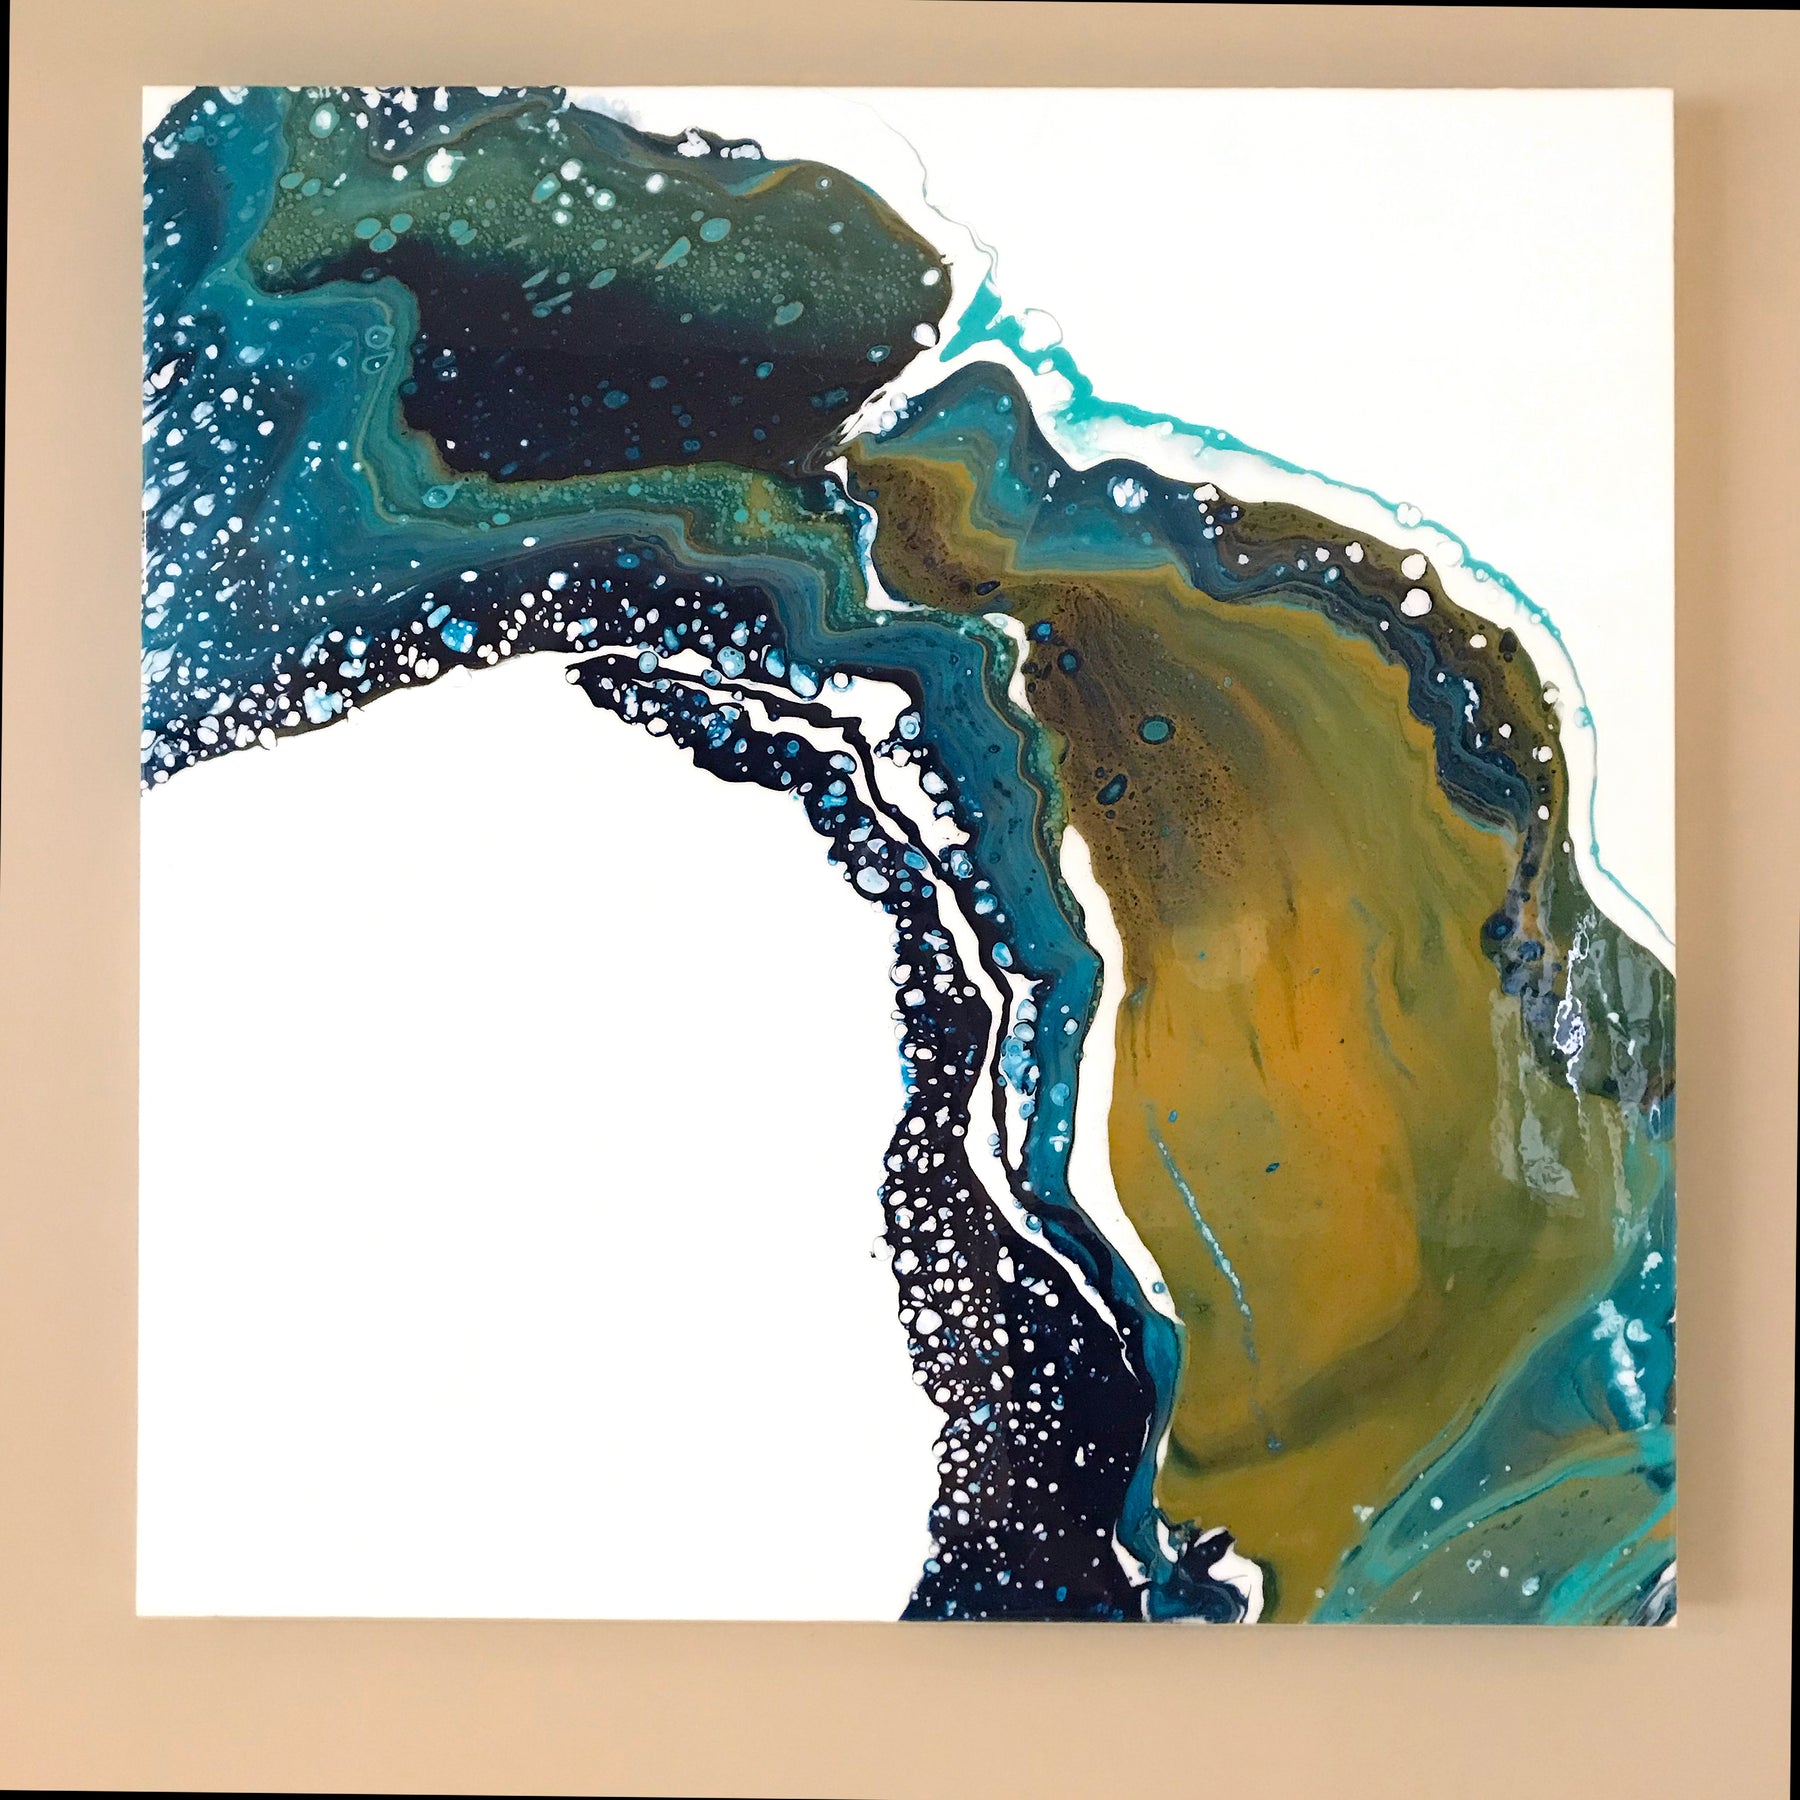 Original Painting - 3 feet by 3 feet - "The Water Curves" - Acrylic painting with Resin finish